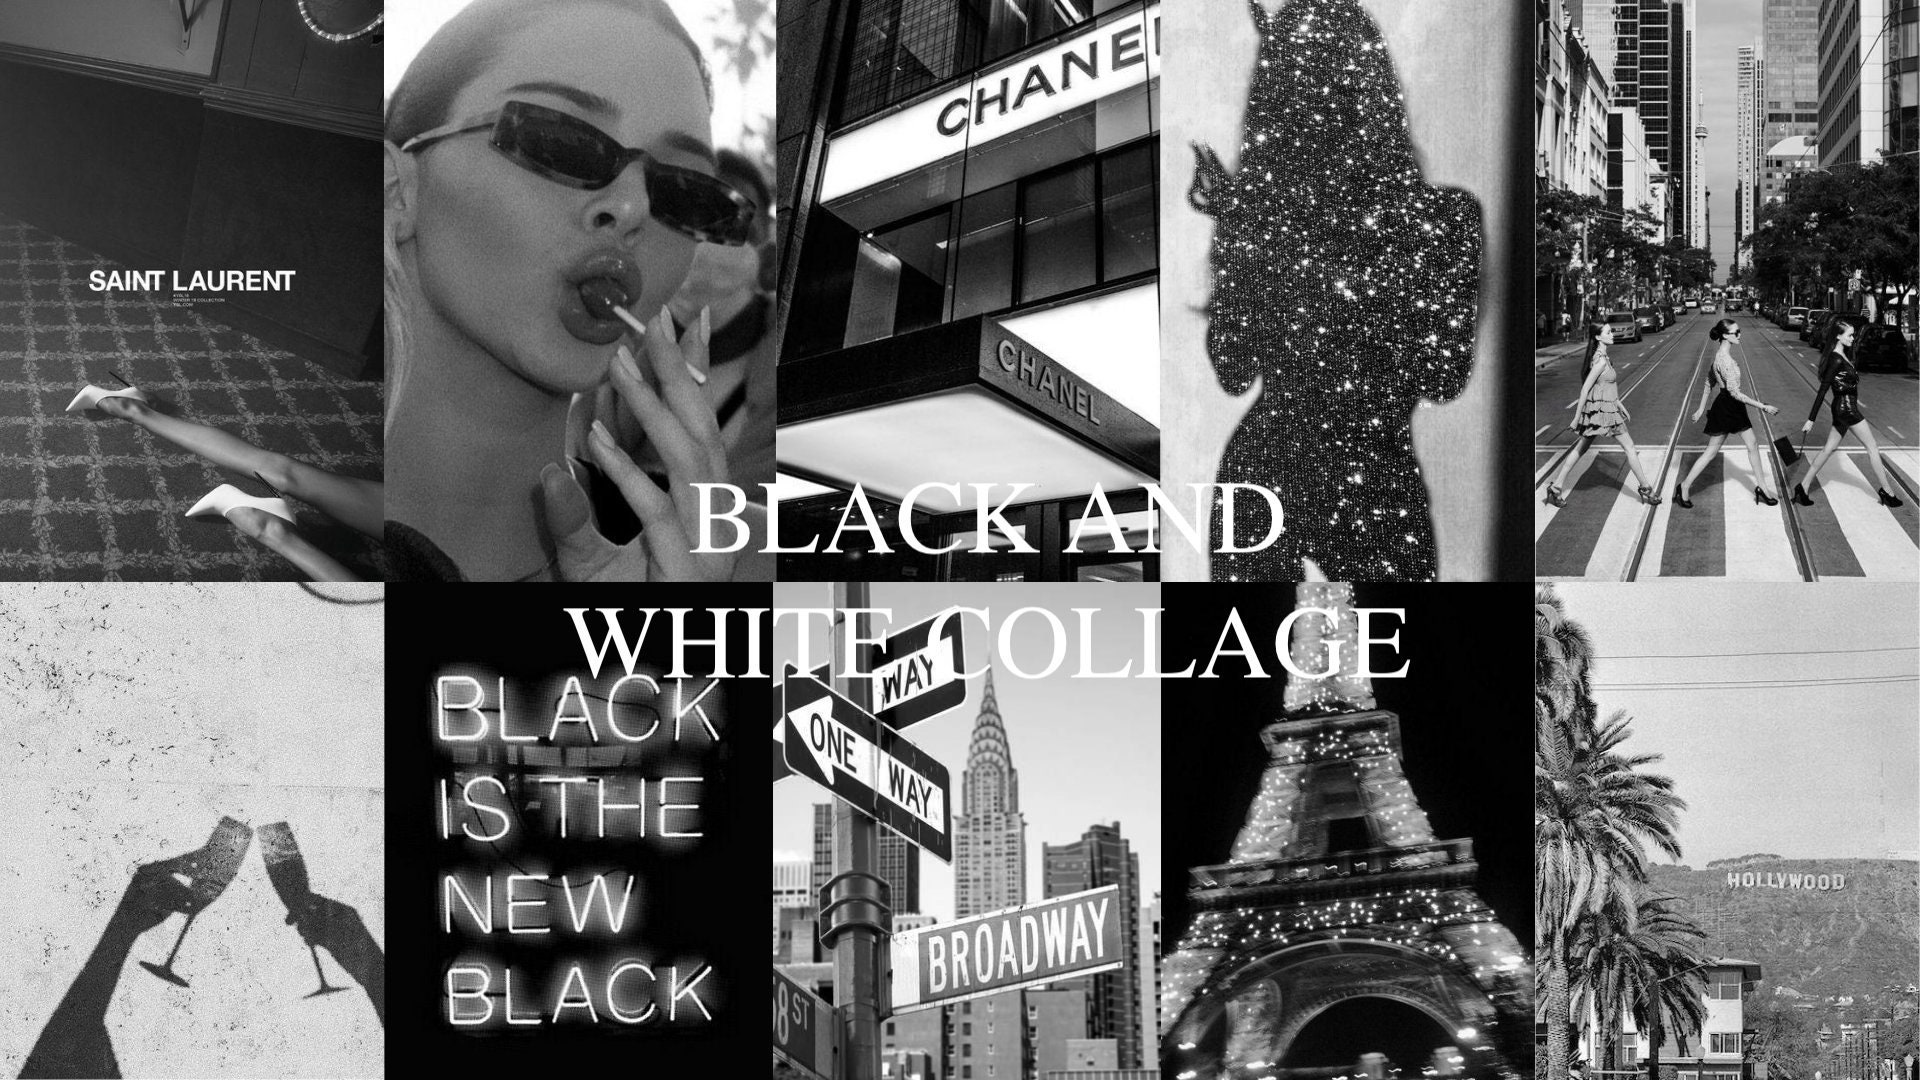 Black and white collage, black is the new black - Broadway